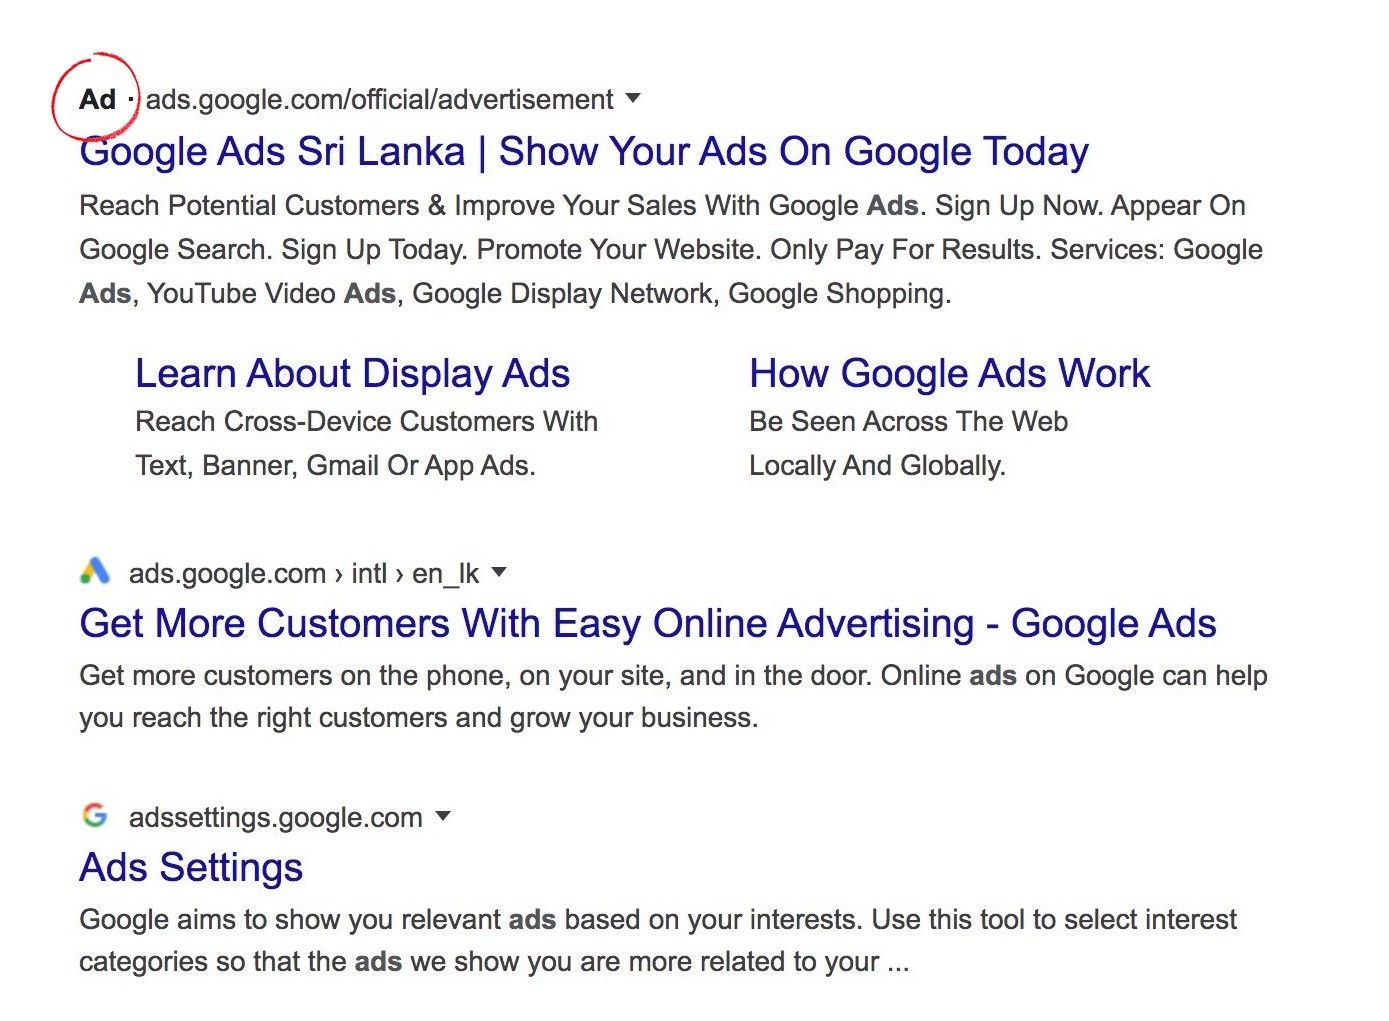 How Google Tricked Us Into Clicking Ads